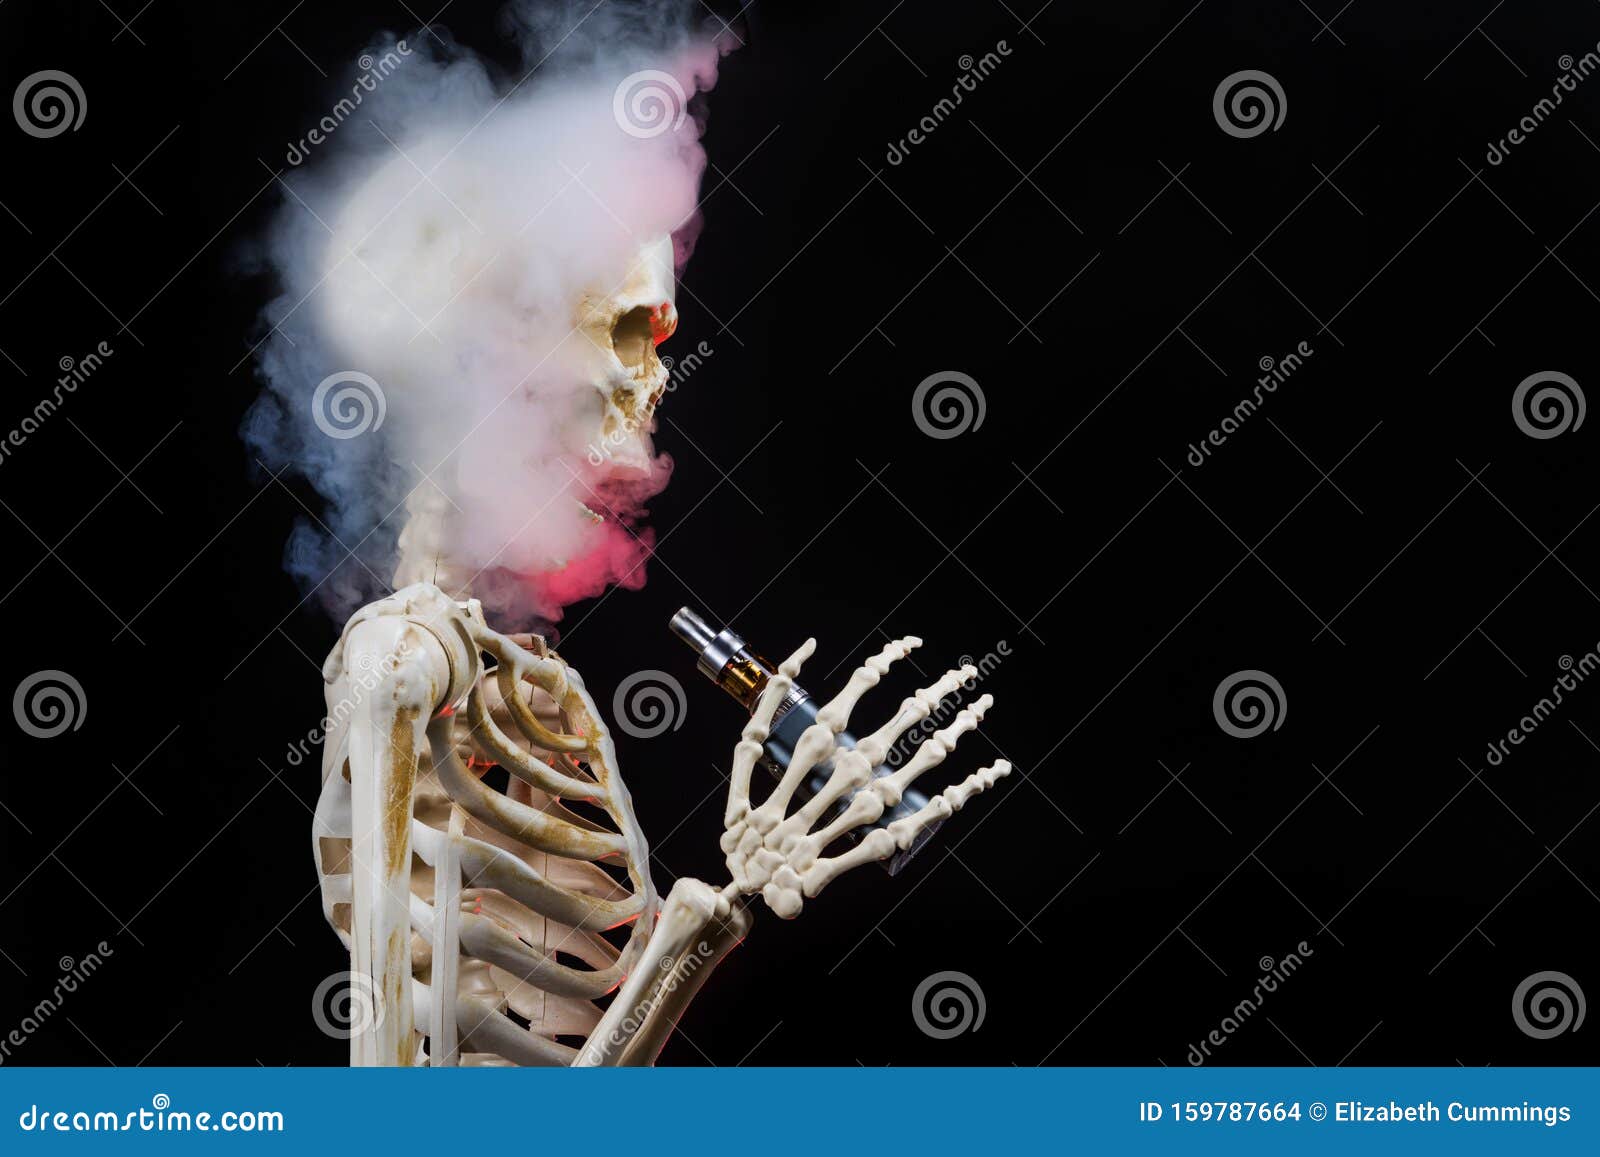 skeleton vaping clouds of red highlighted vapor with an ecigarette